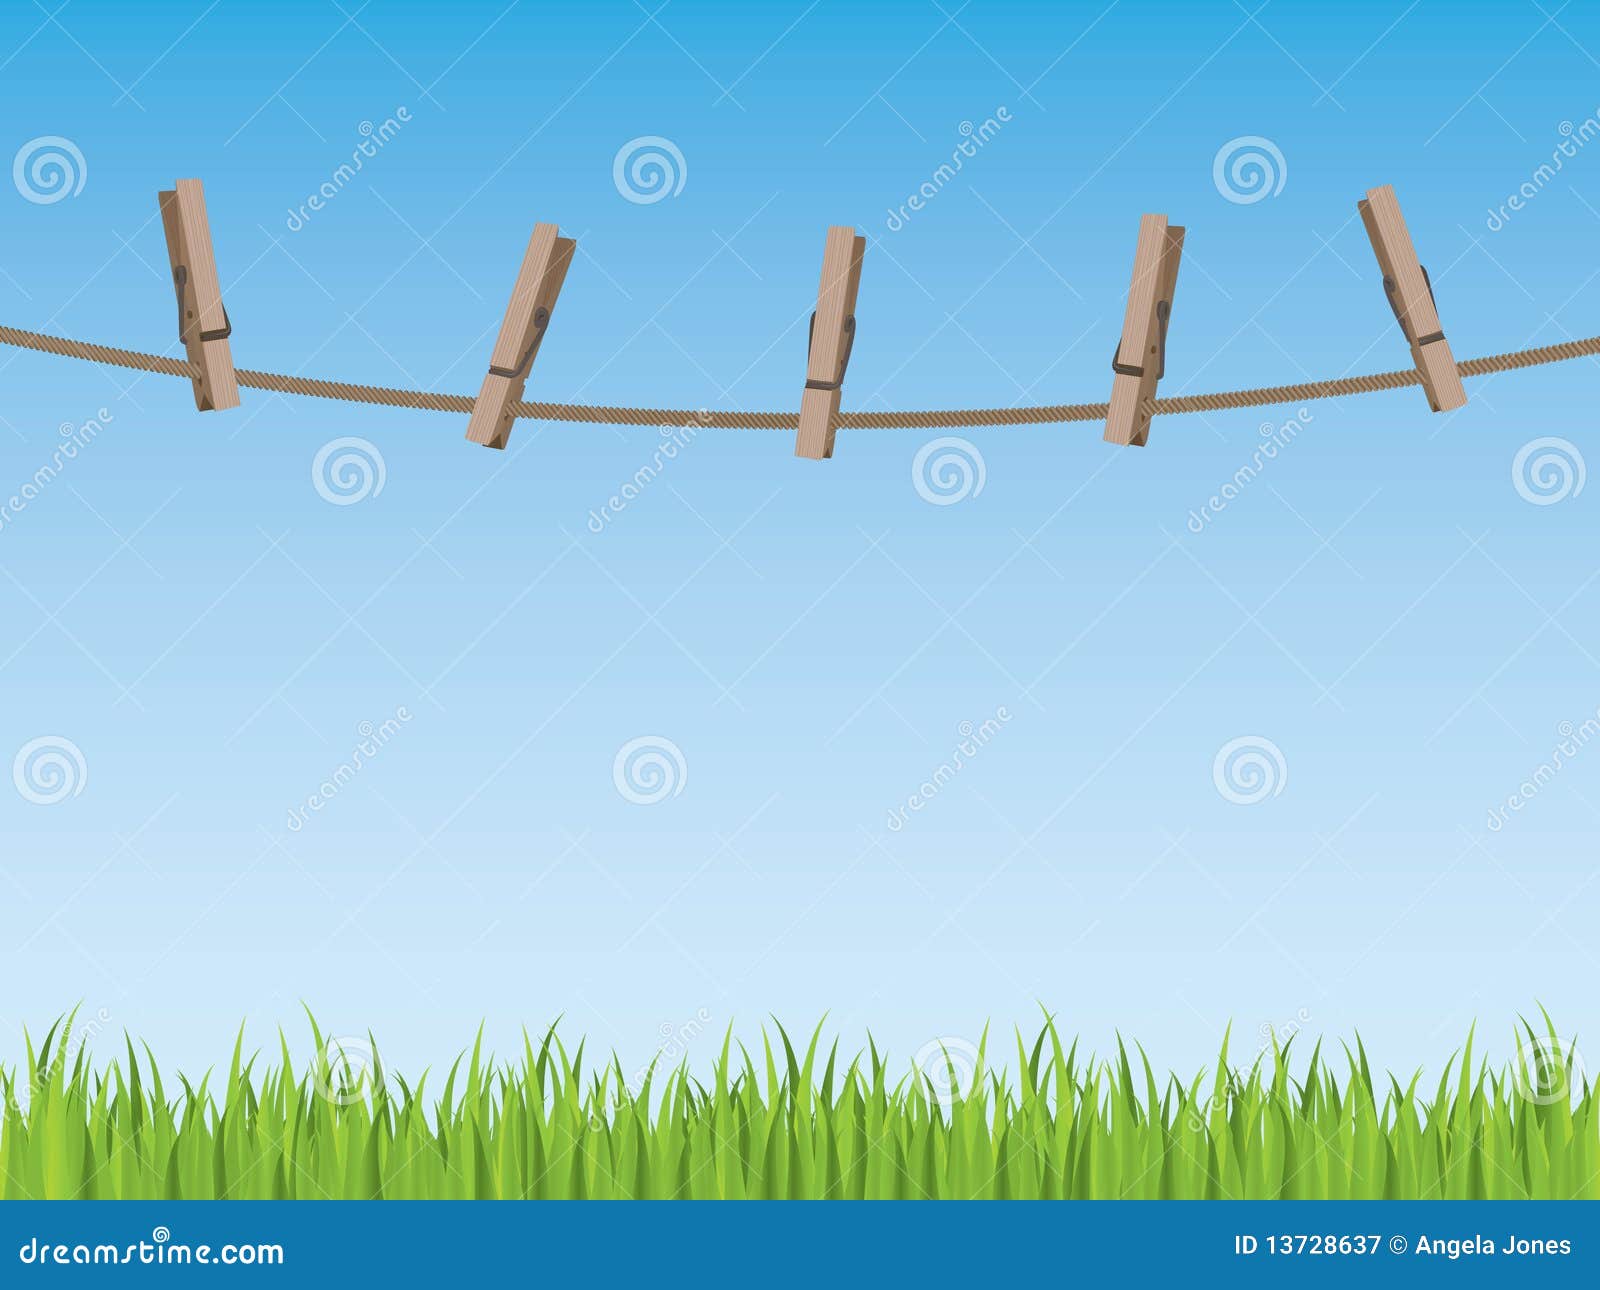 Clothes line background stock illustration. Illustration of field